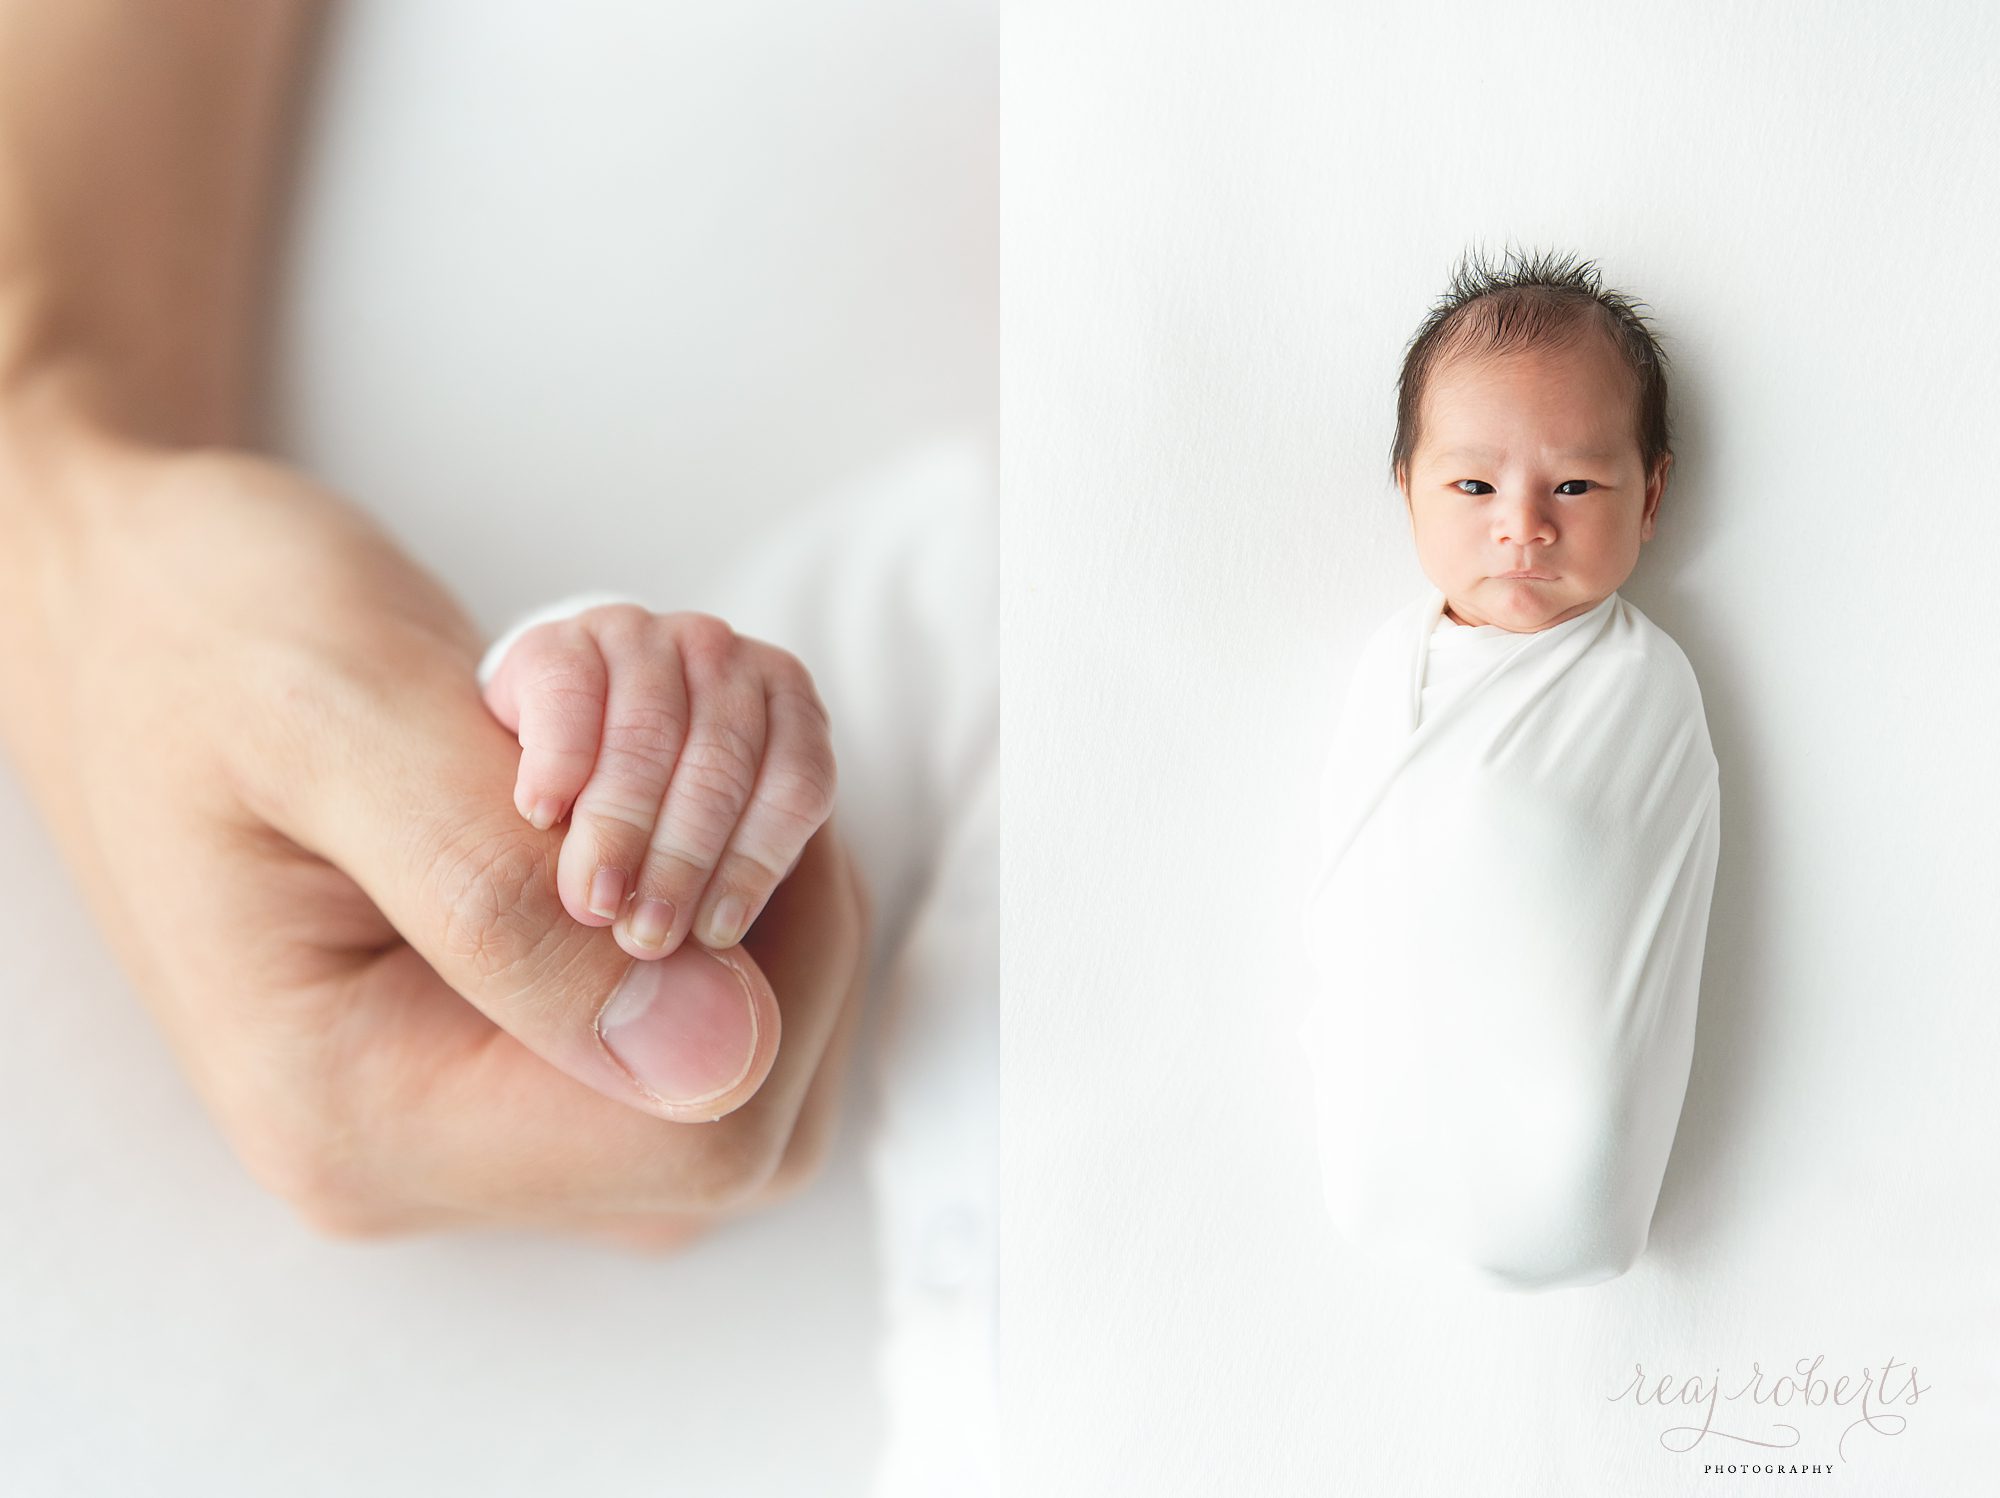 simple clean organic timeless minimalistic newborn photography by Reaj Roberts Photography